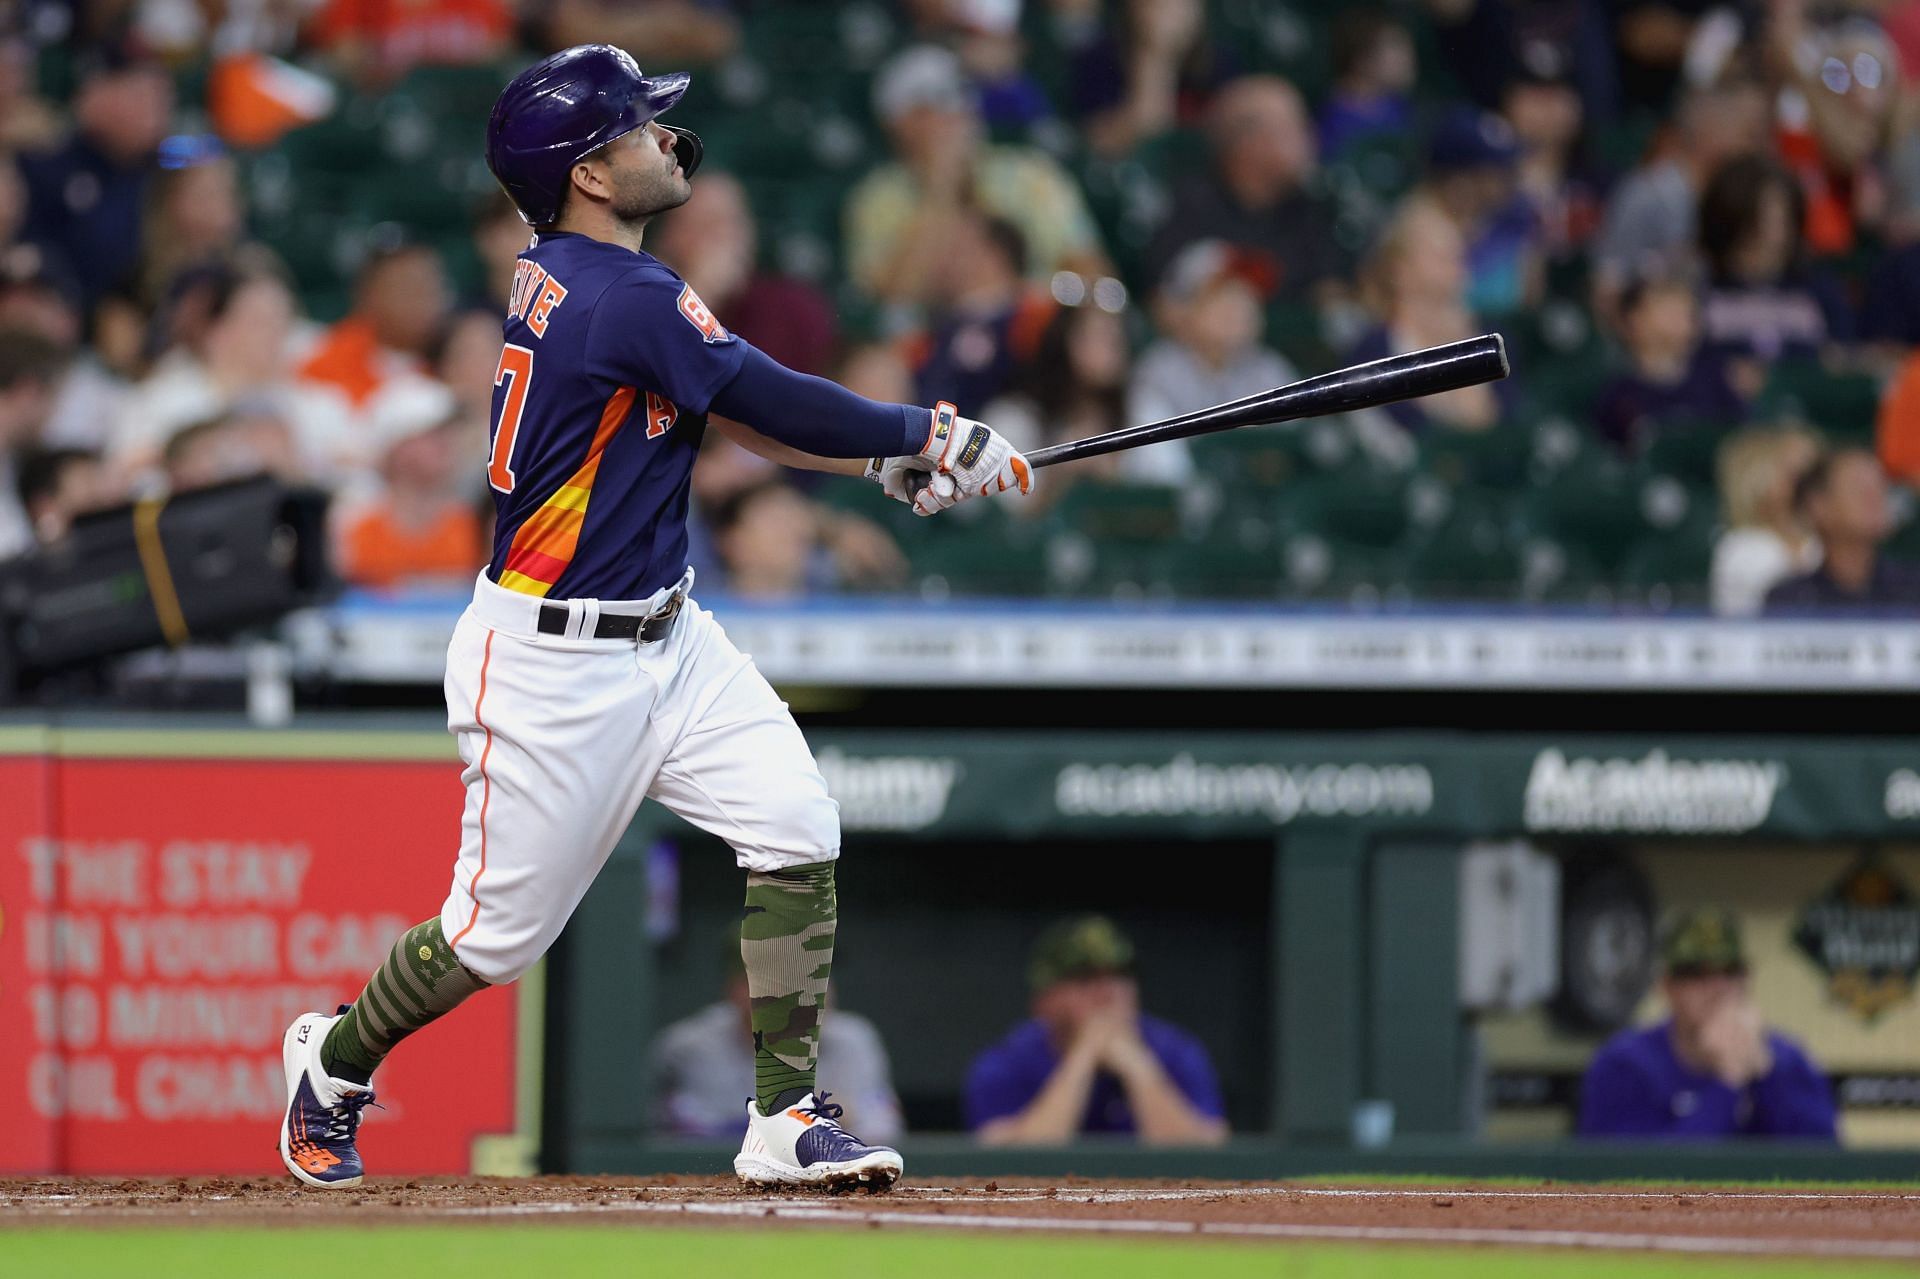 Nothing can cool down Jose Altuve. That's his 8th HR of the MONTH.